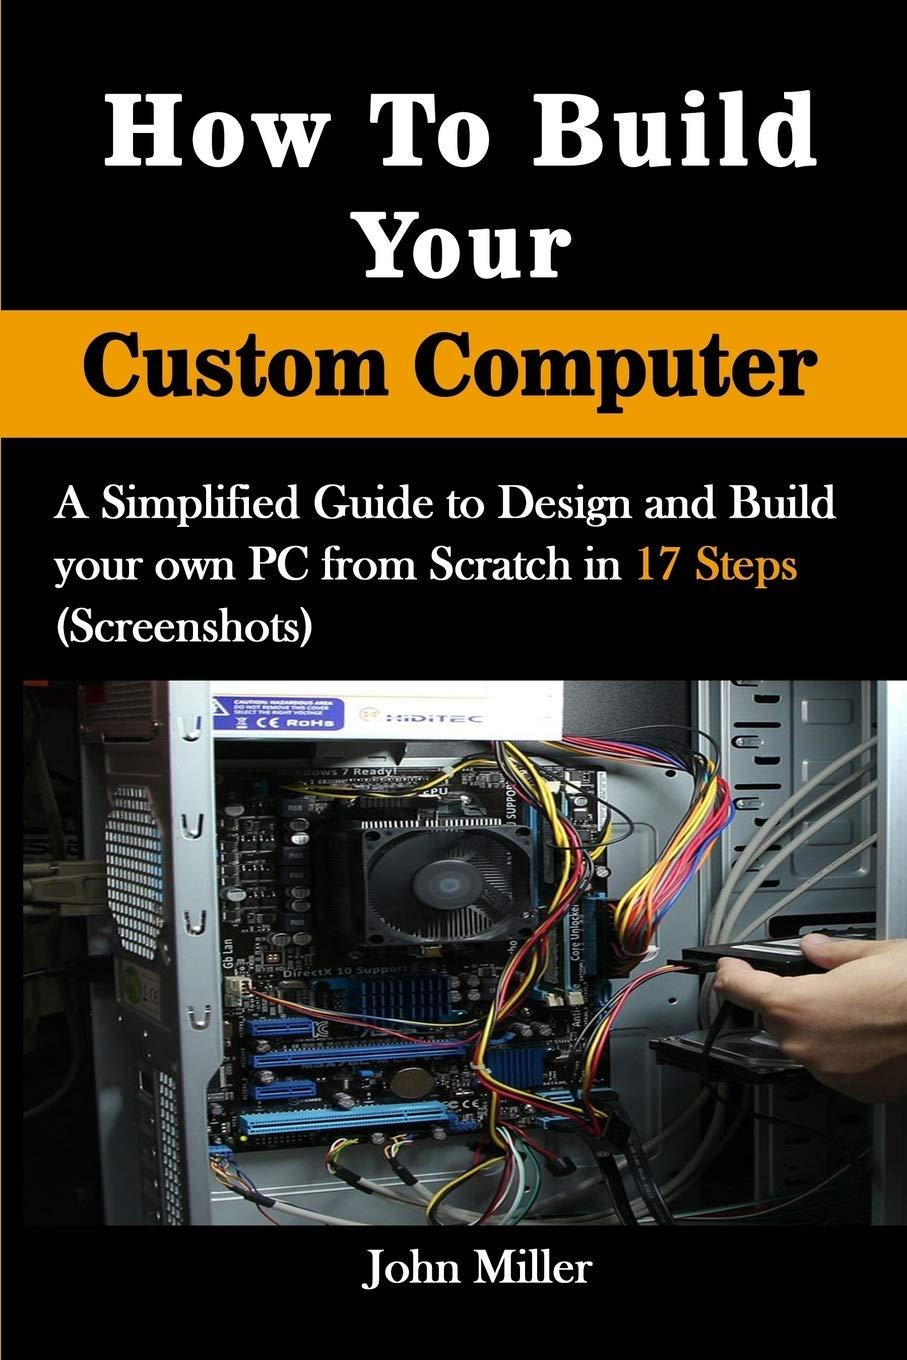 how to build your custom computer a simplified guide to design and build your own pc from scratch in 17 steps